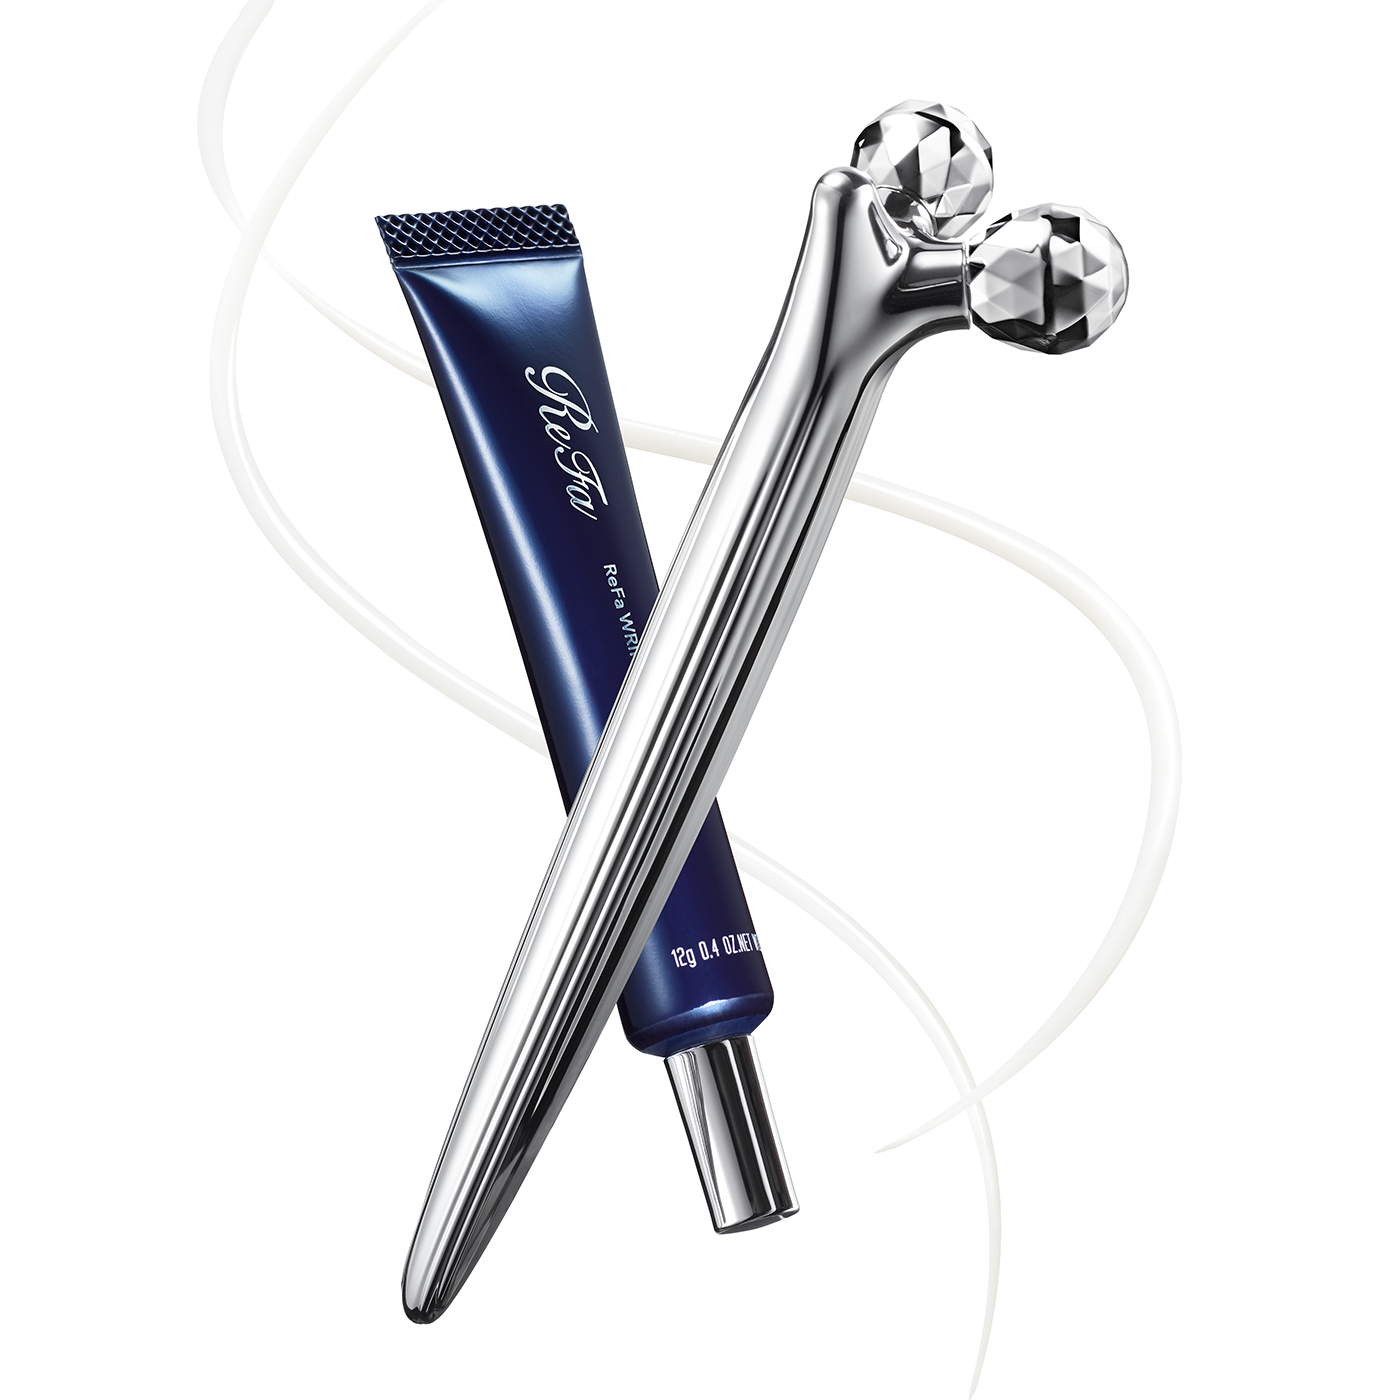 Introducing the first anti-wrinkle regimen from ReFa: A synergistic approach that pairs a beauty roller with a cream to target the visible signs of aging<sup>*1</sup>.